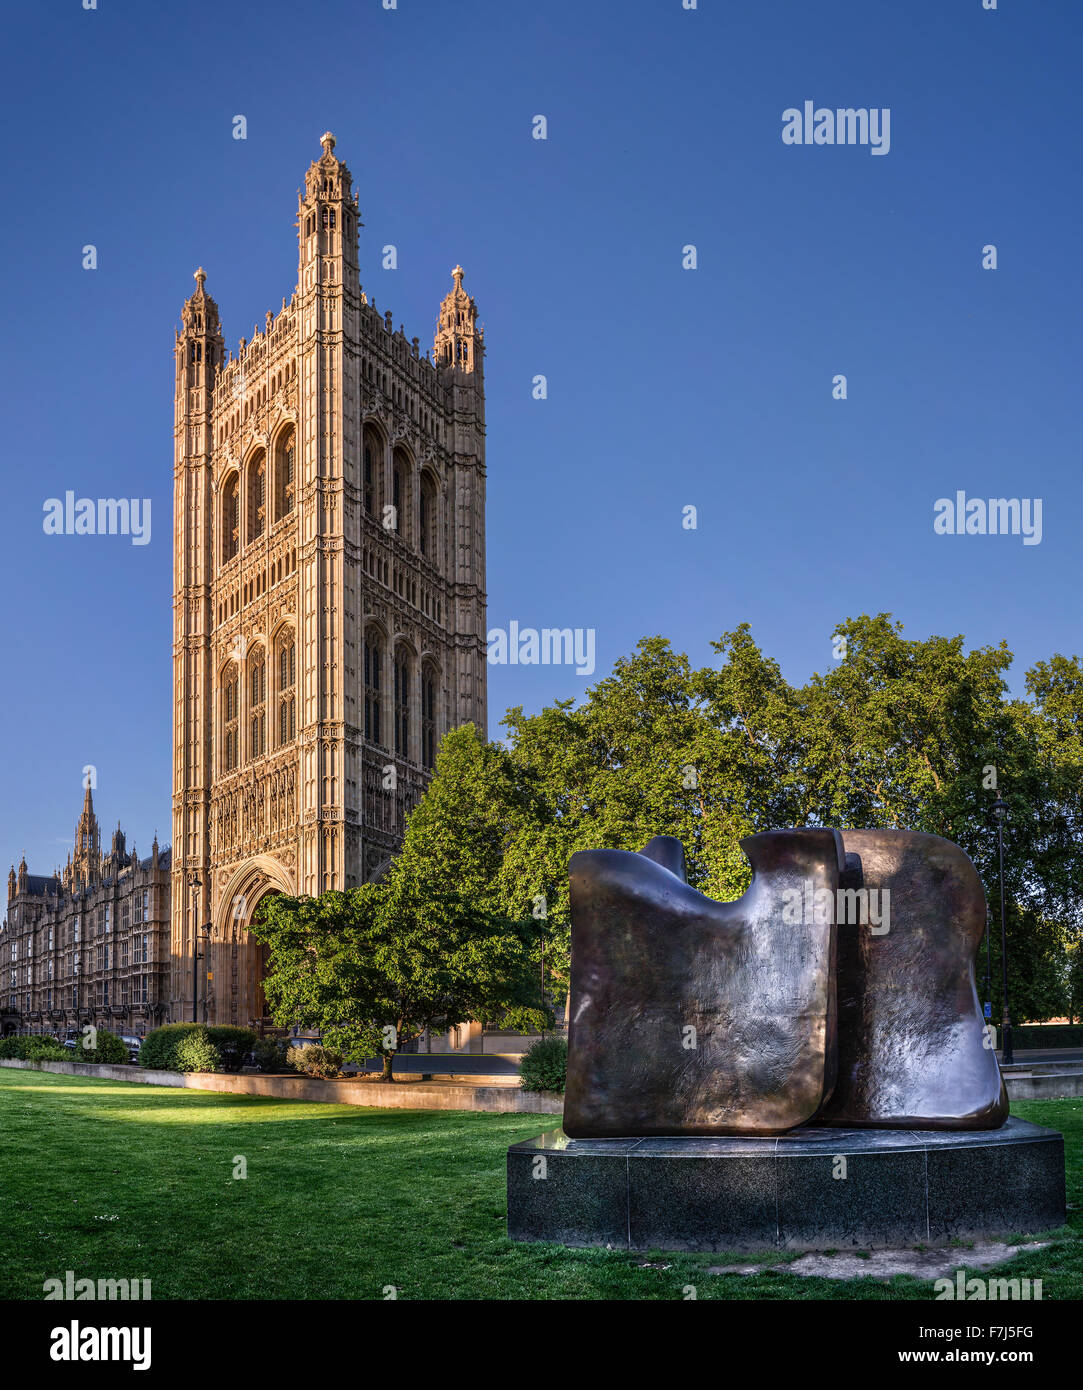 UK, London, Palace of Westminster, Victoria Tower Stockfoto